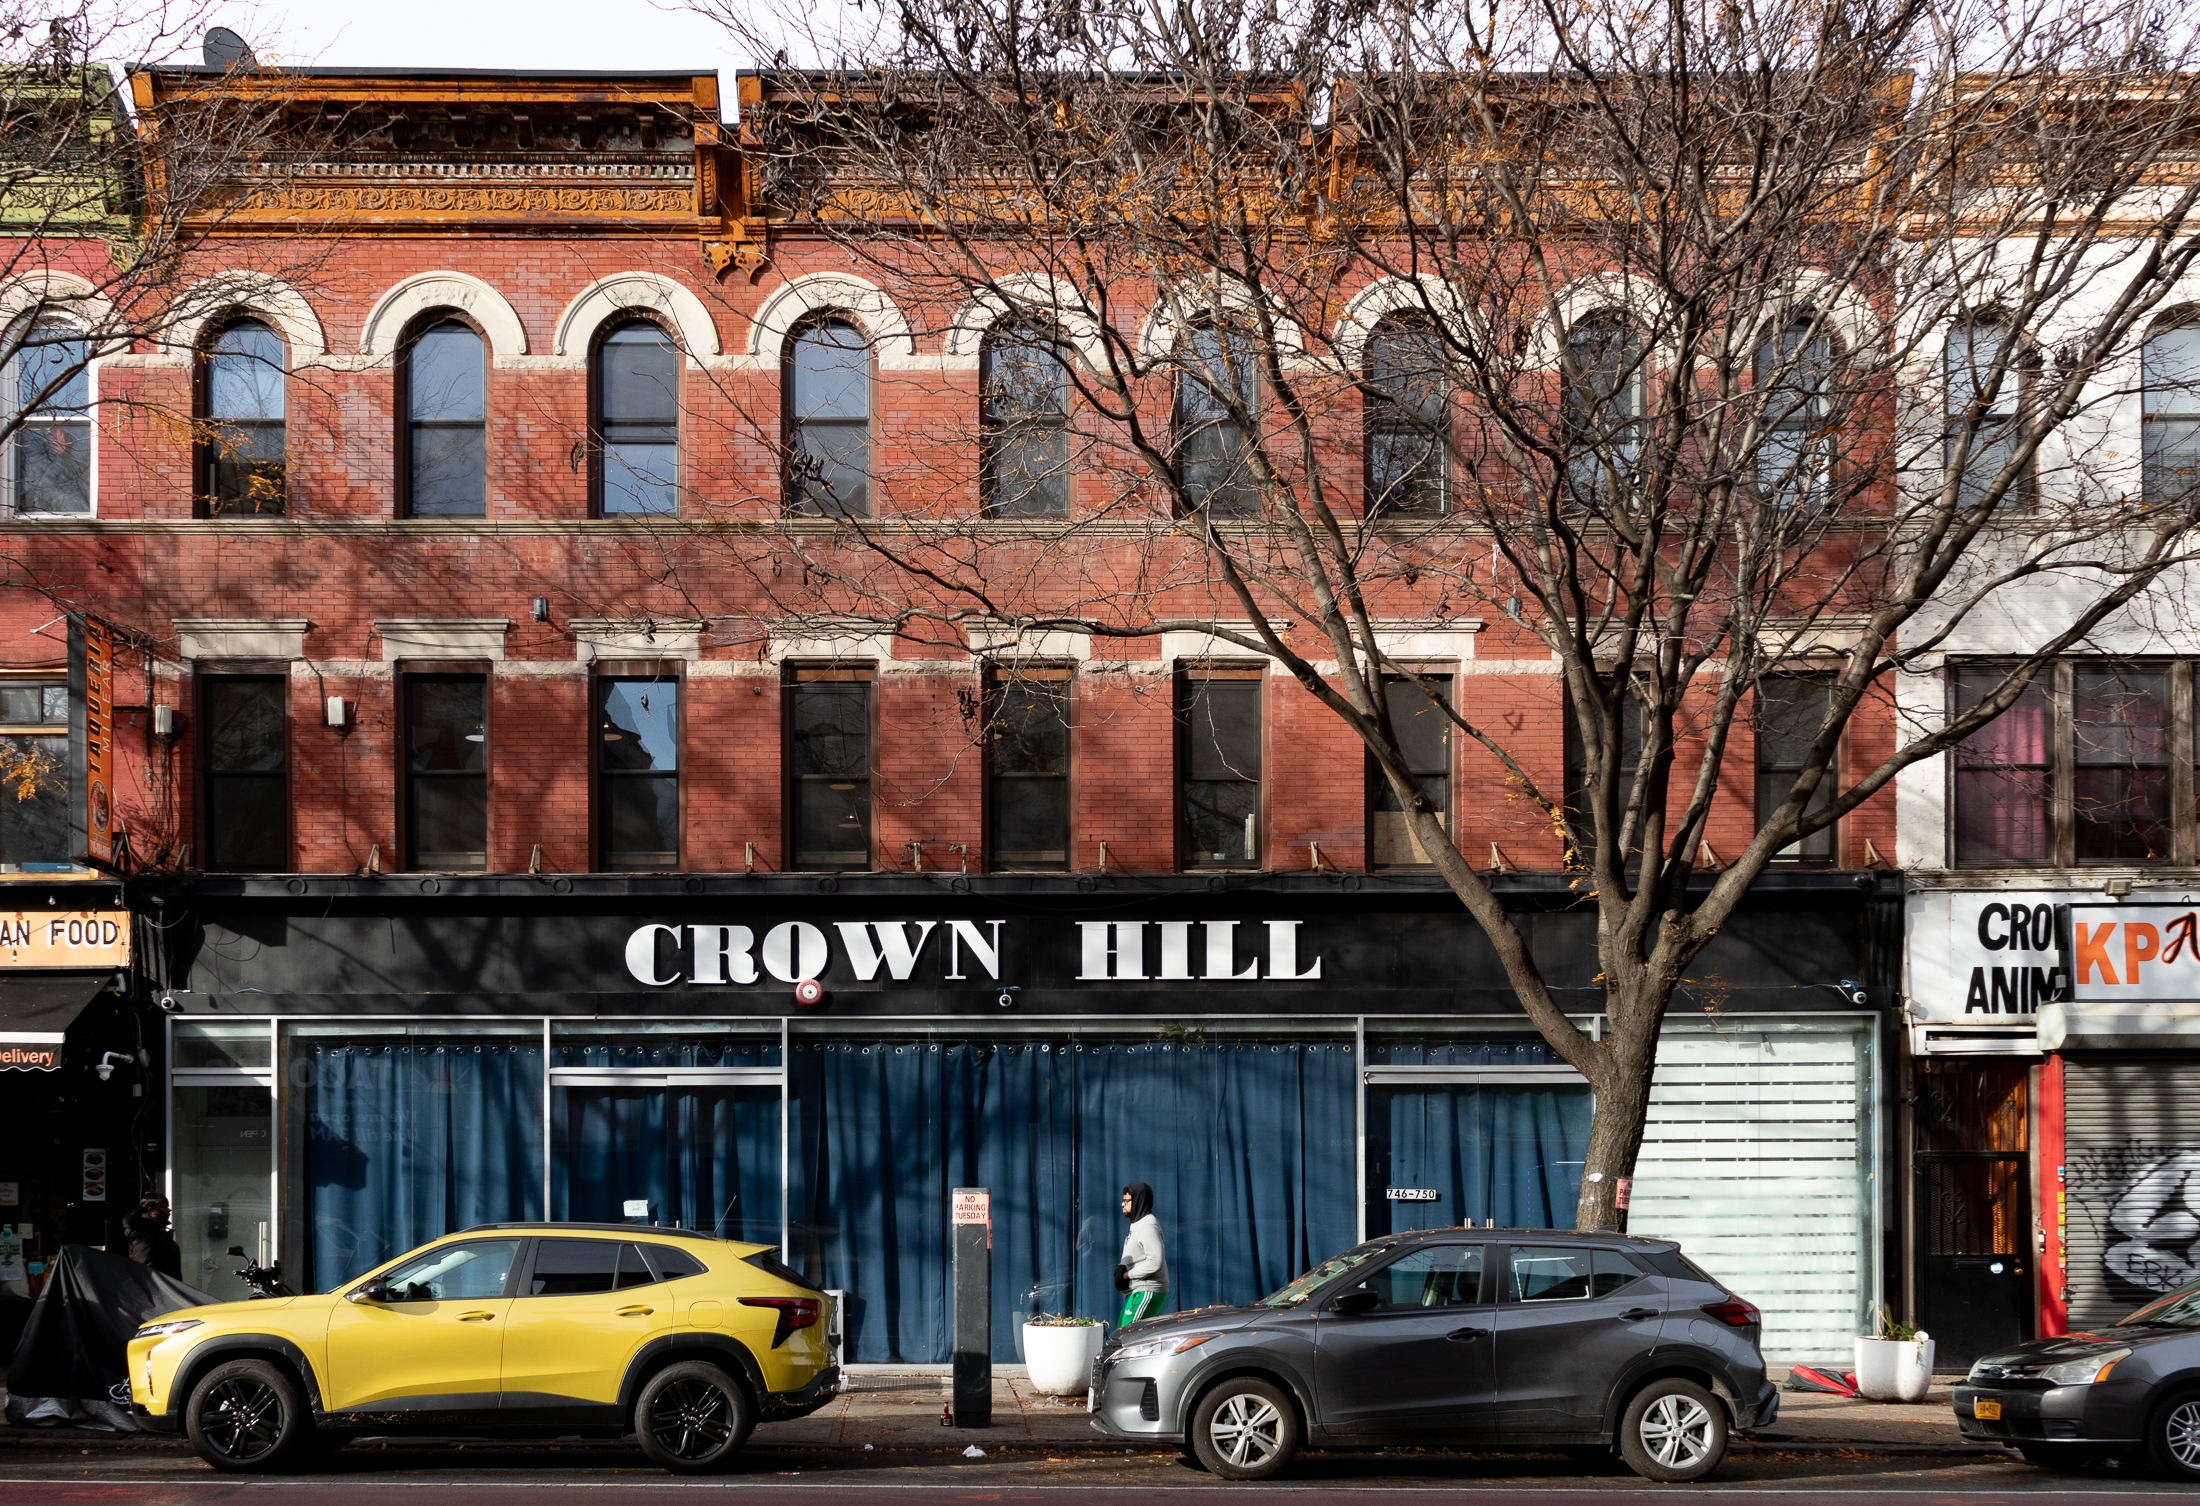 brick exterior with a sign for Crown Hill